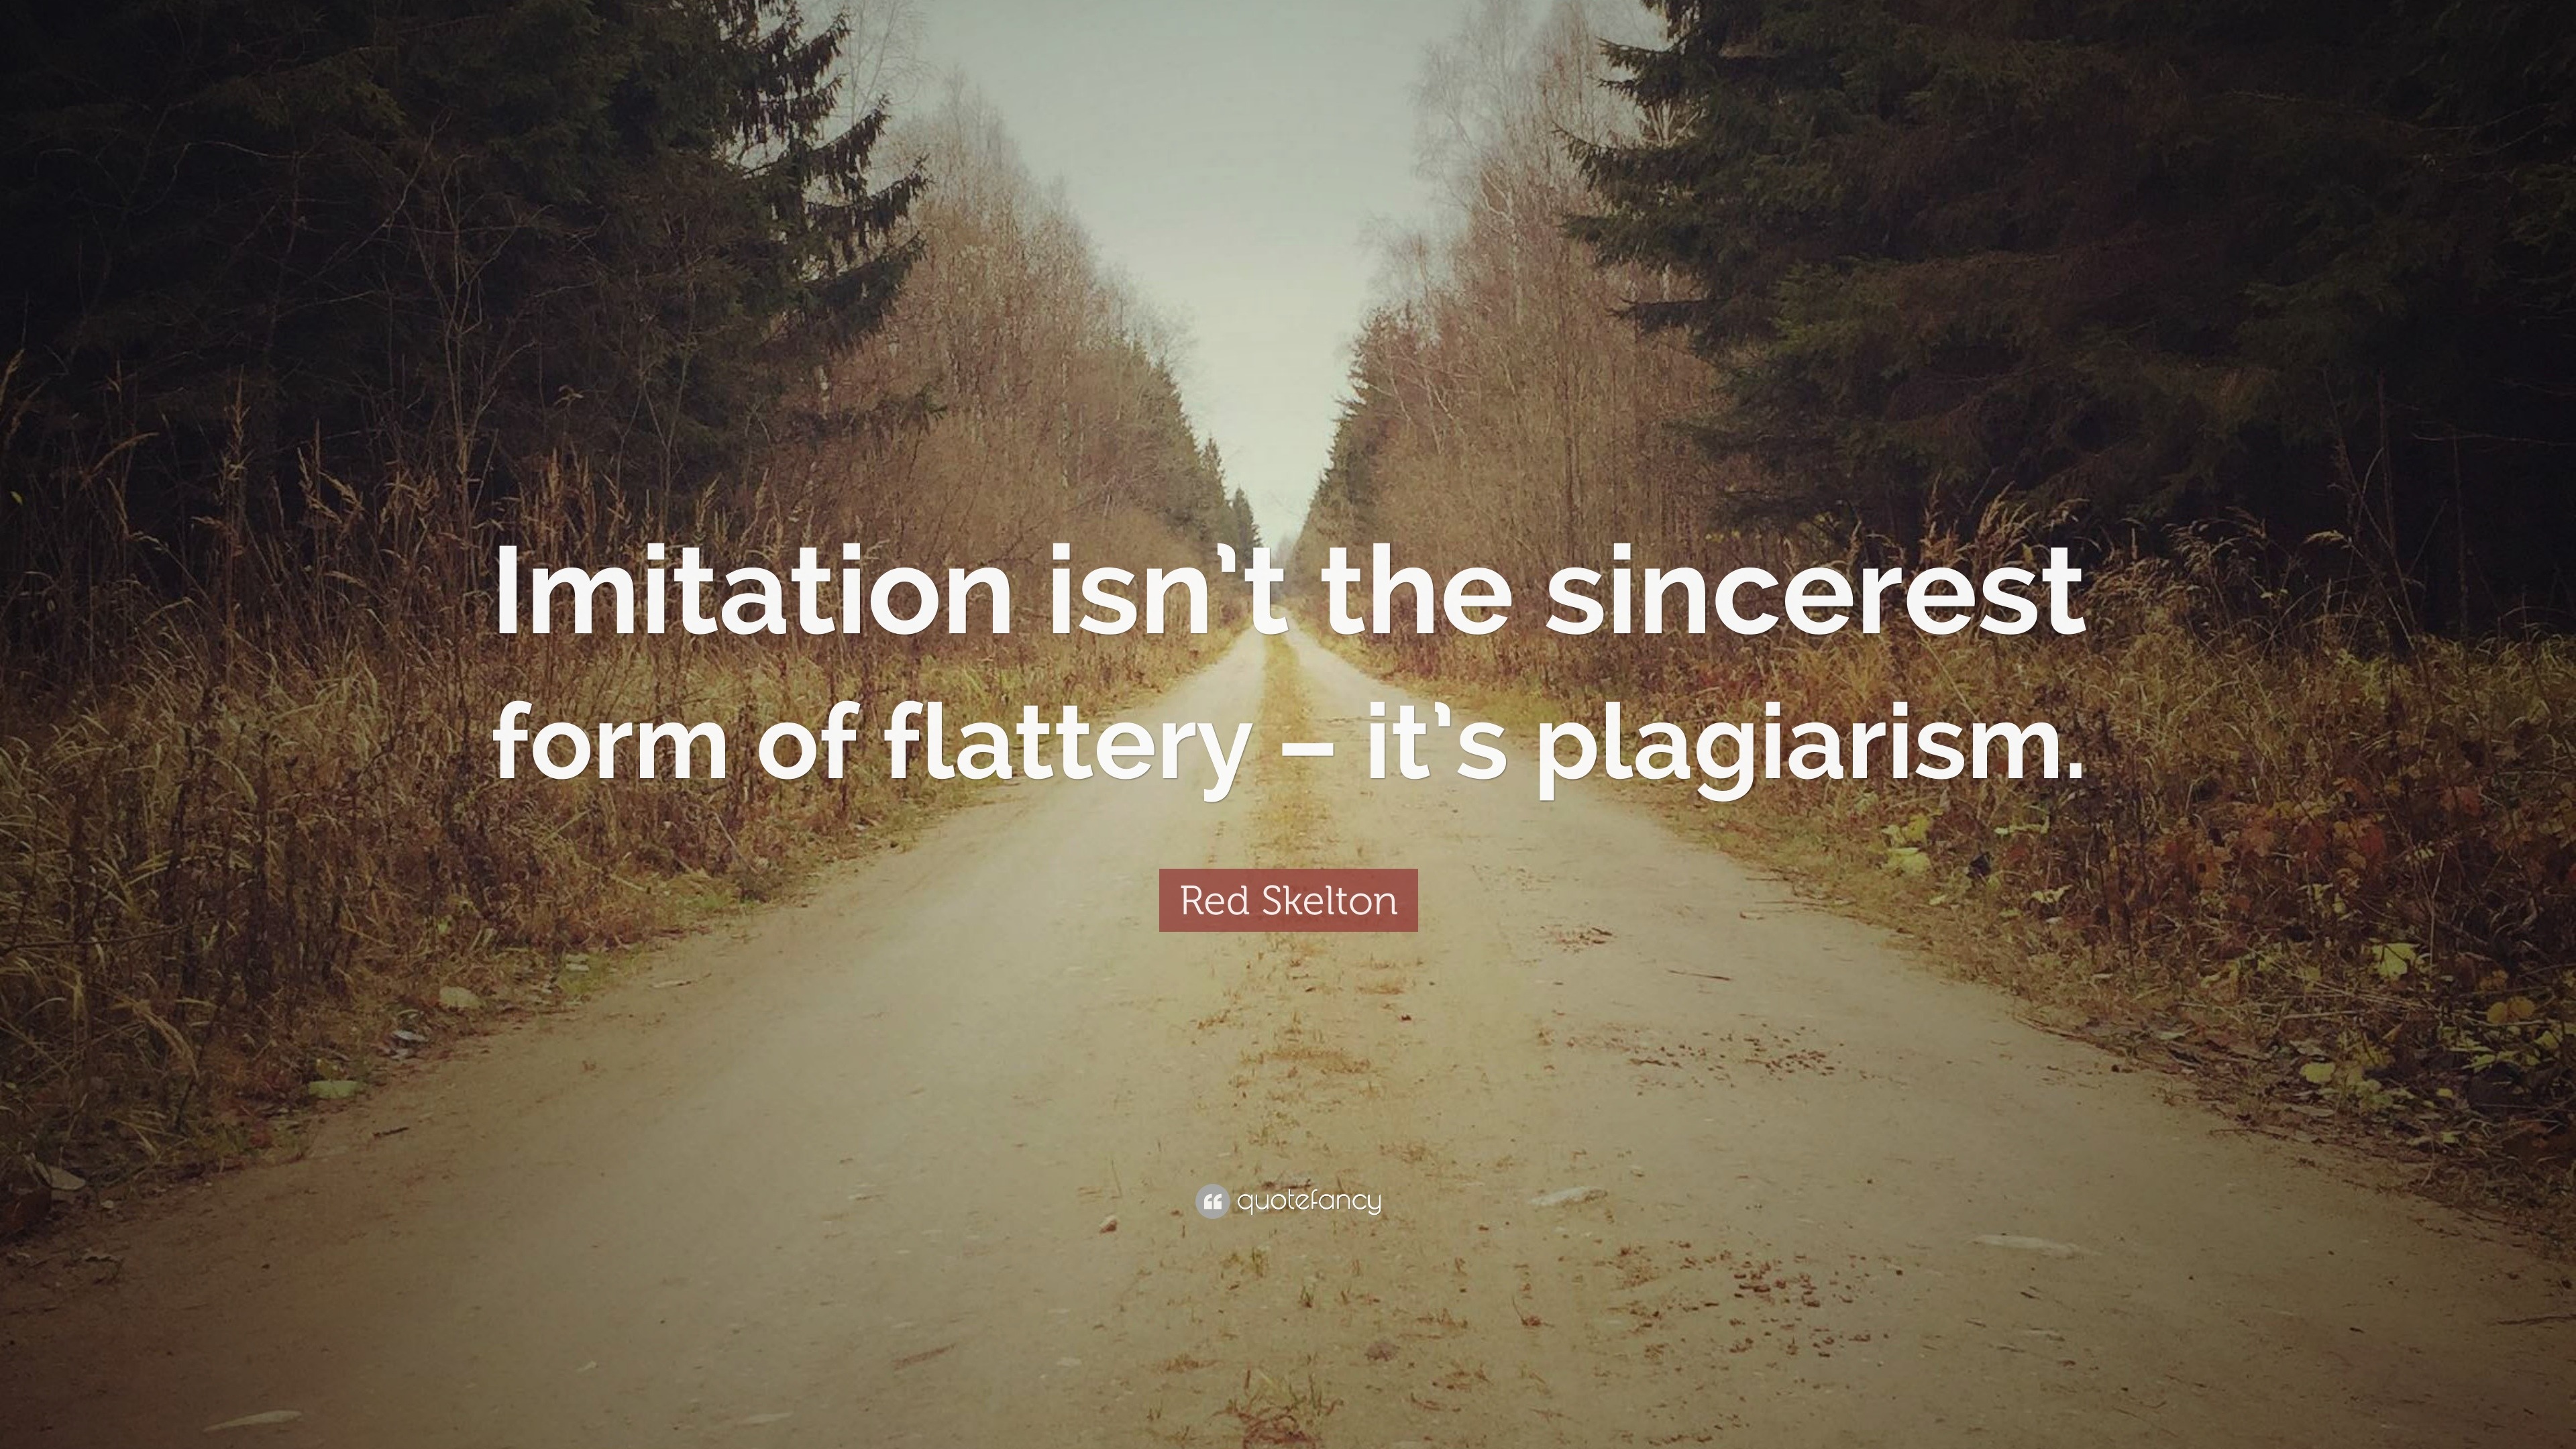 Red Skelton Quote: “Imitation isn’t the sincerest form of flattery – it